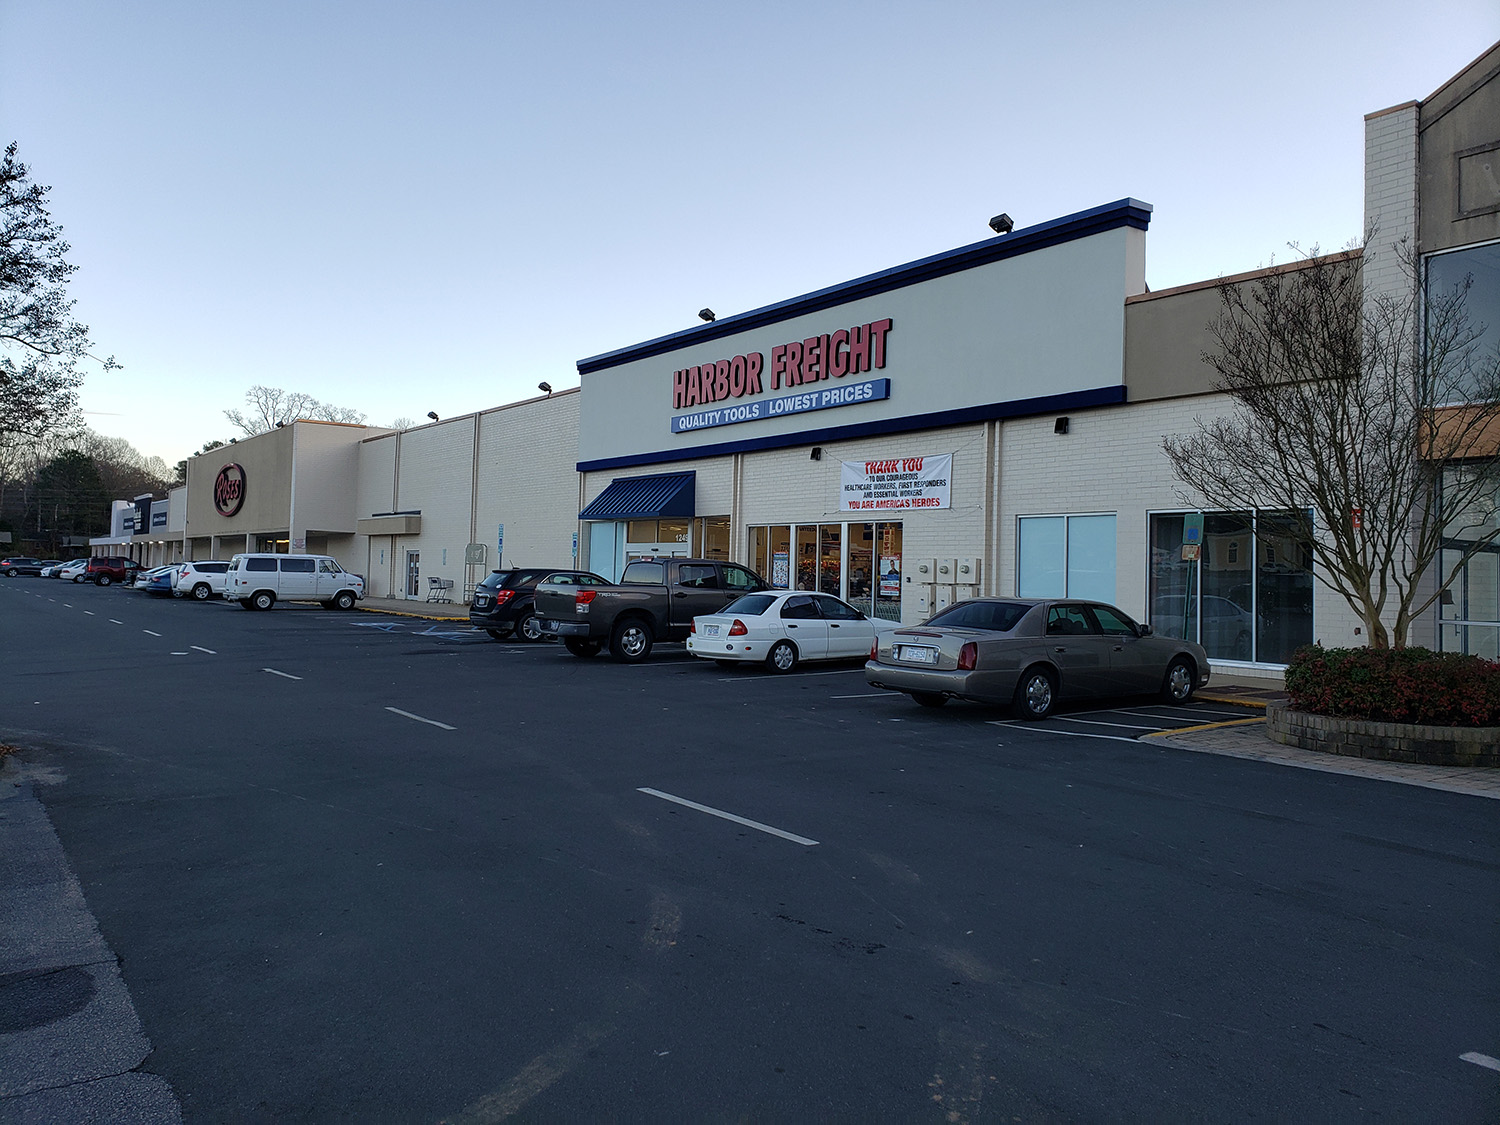 Other tenants at Henderson Pointe include Harbor Freight and Roses Discount Store